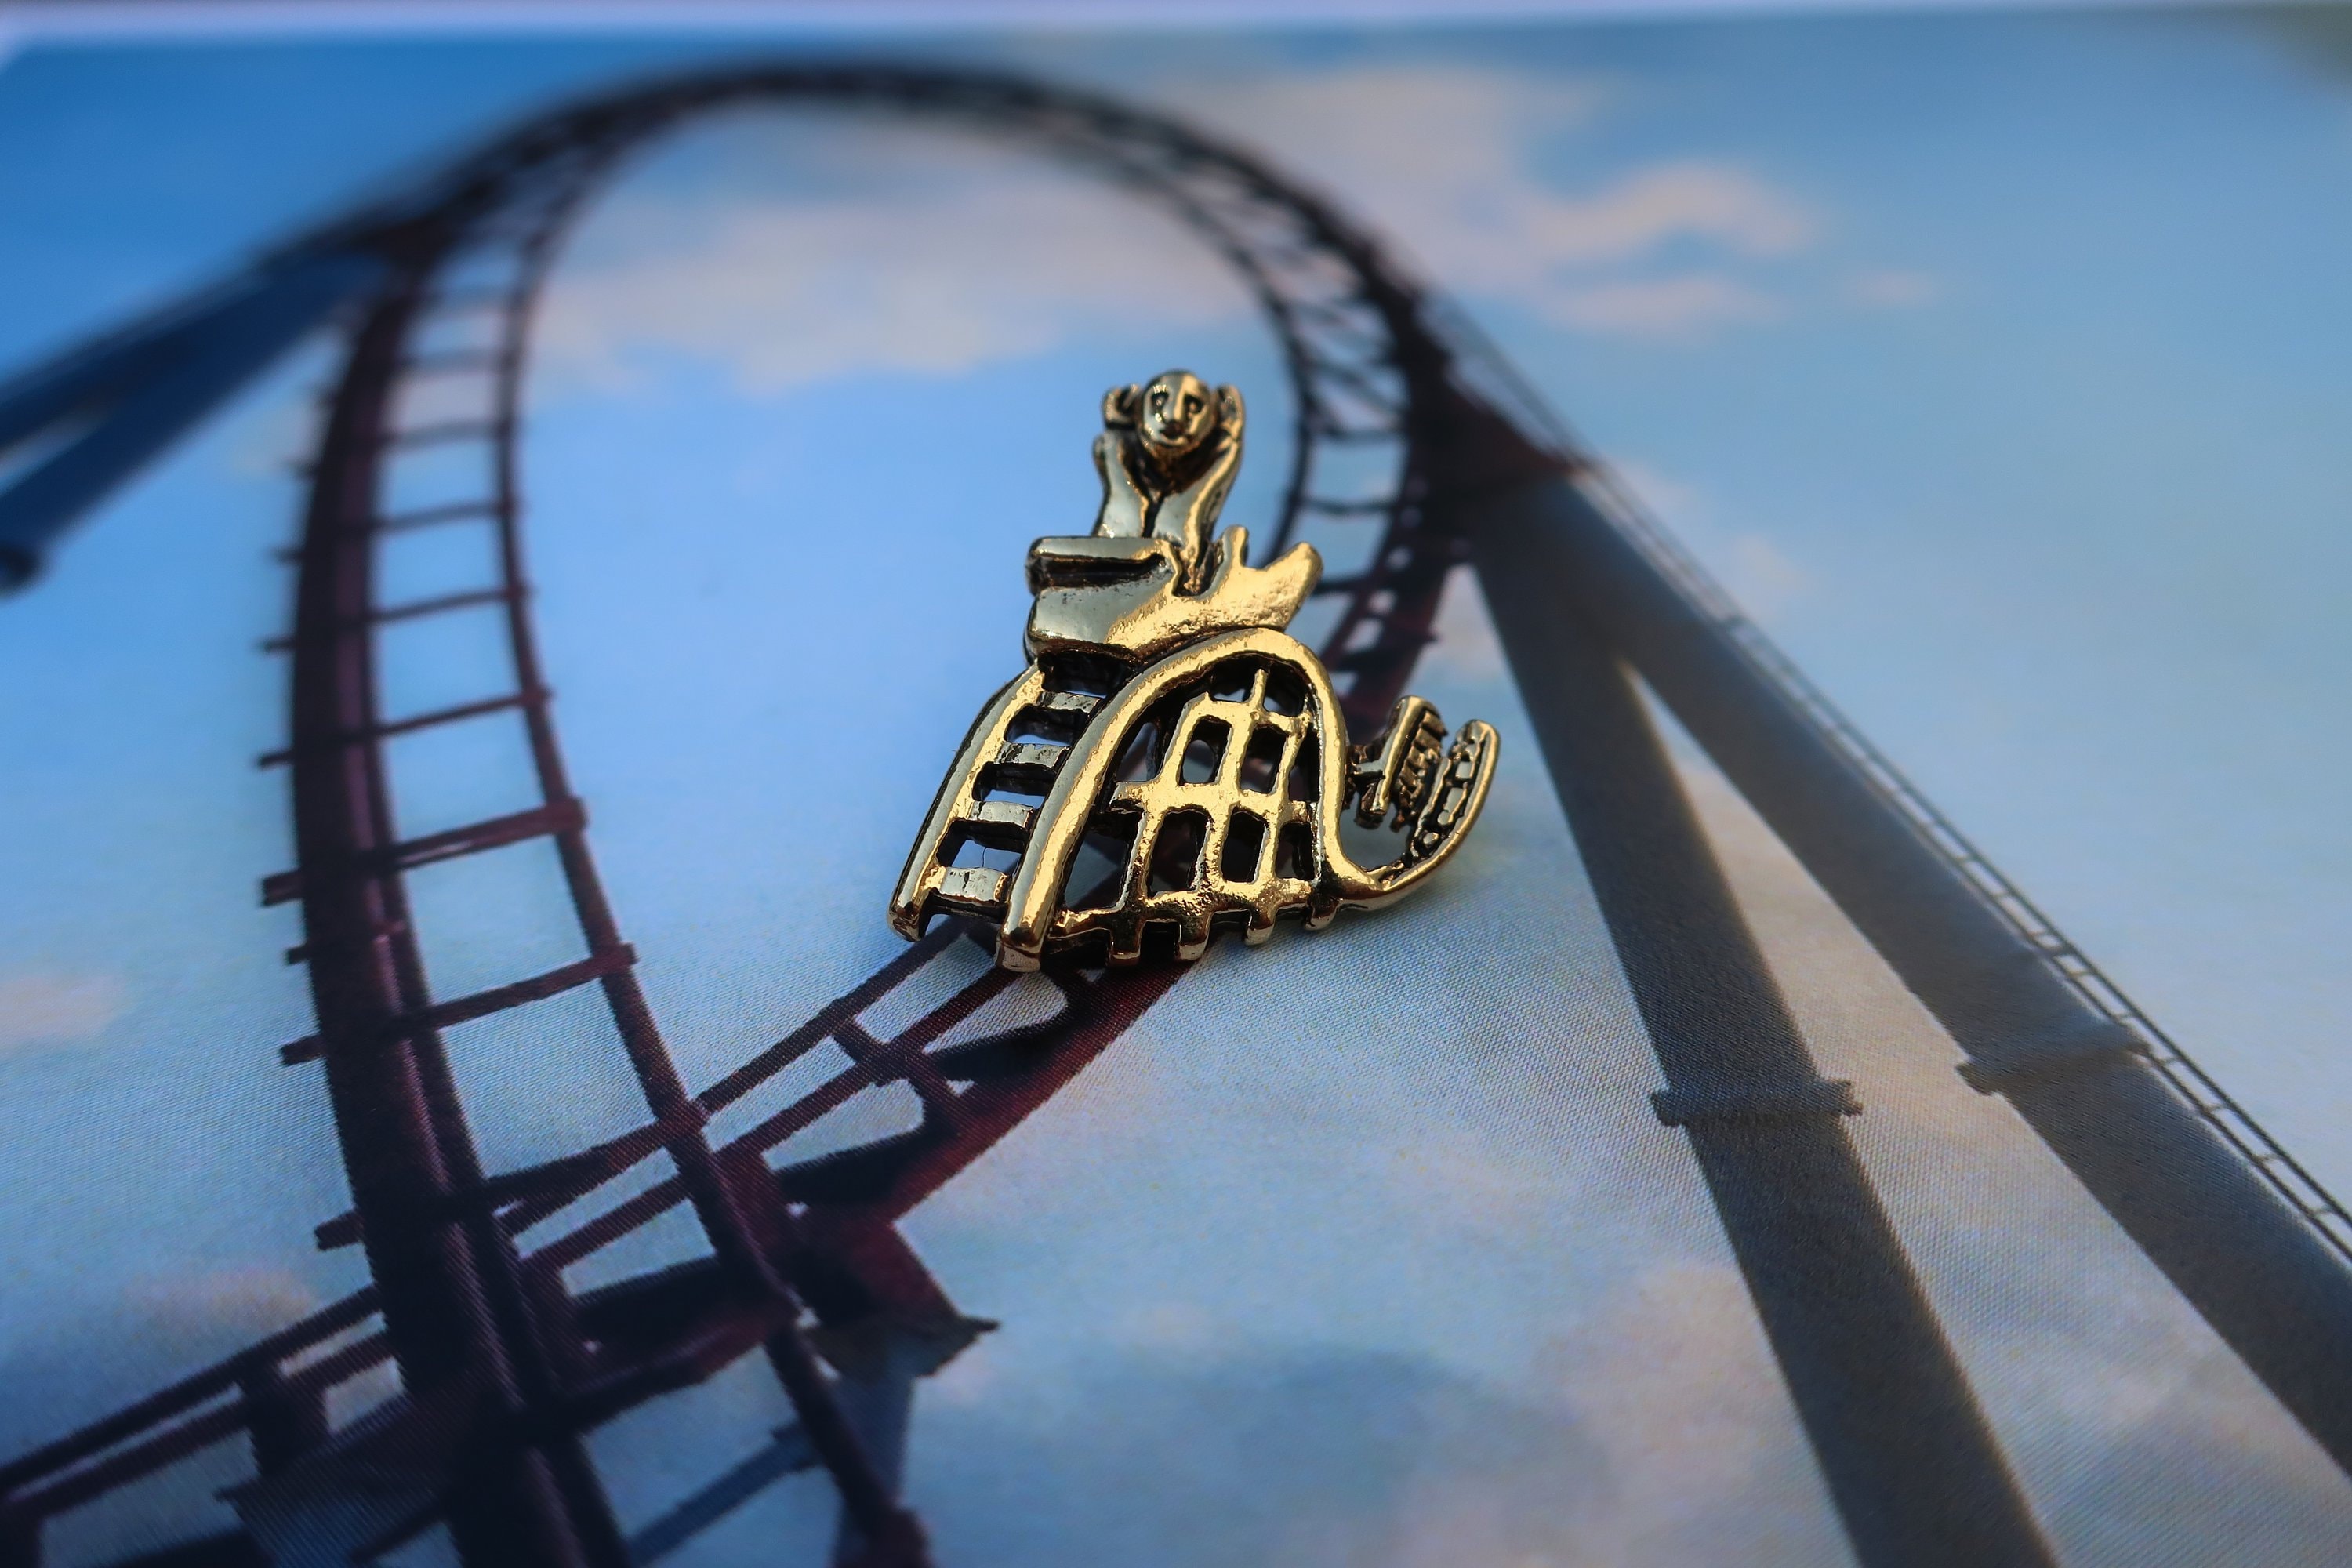 A nice entrance - View Download  Roller coaster tycoon, Roller coaster,  Outdoor blanket